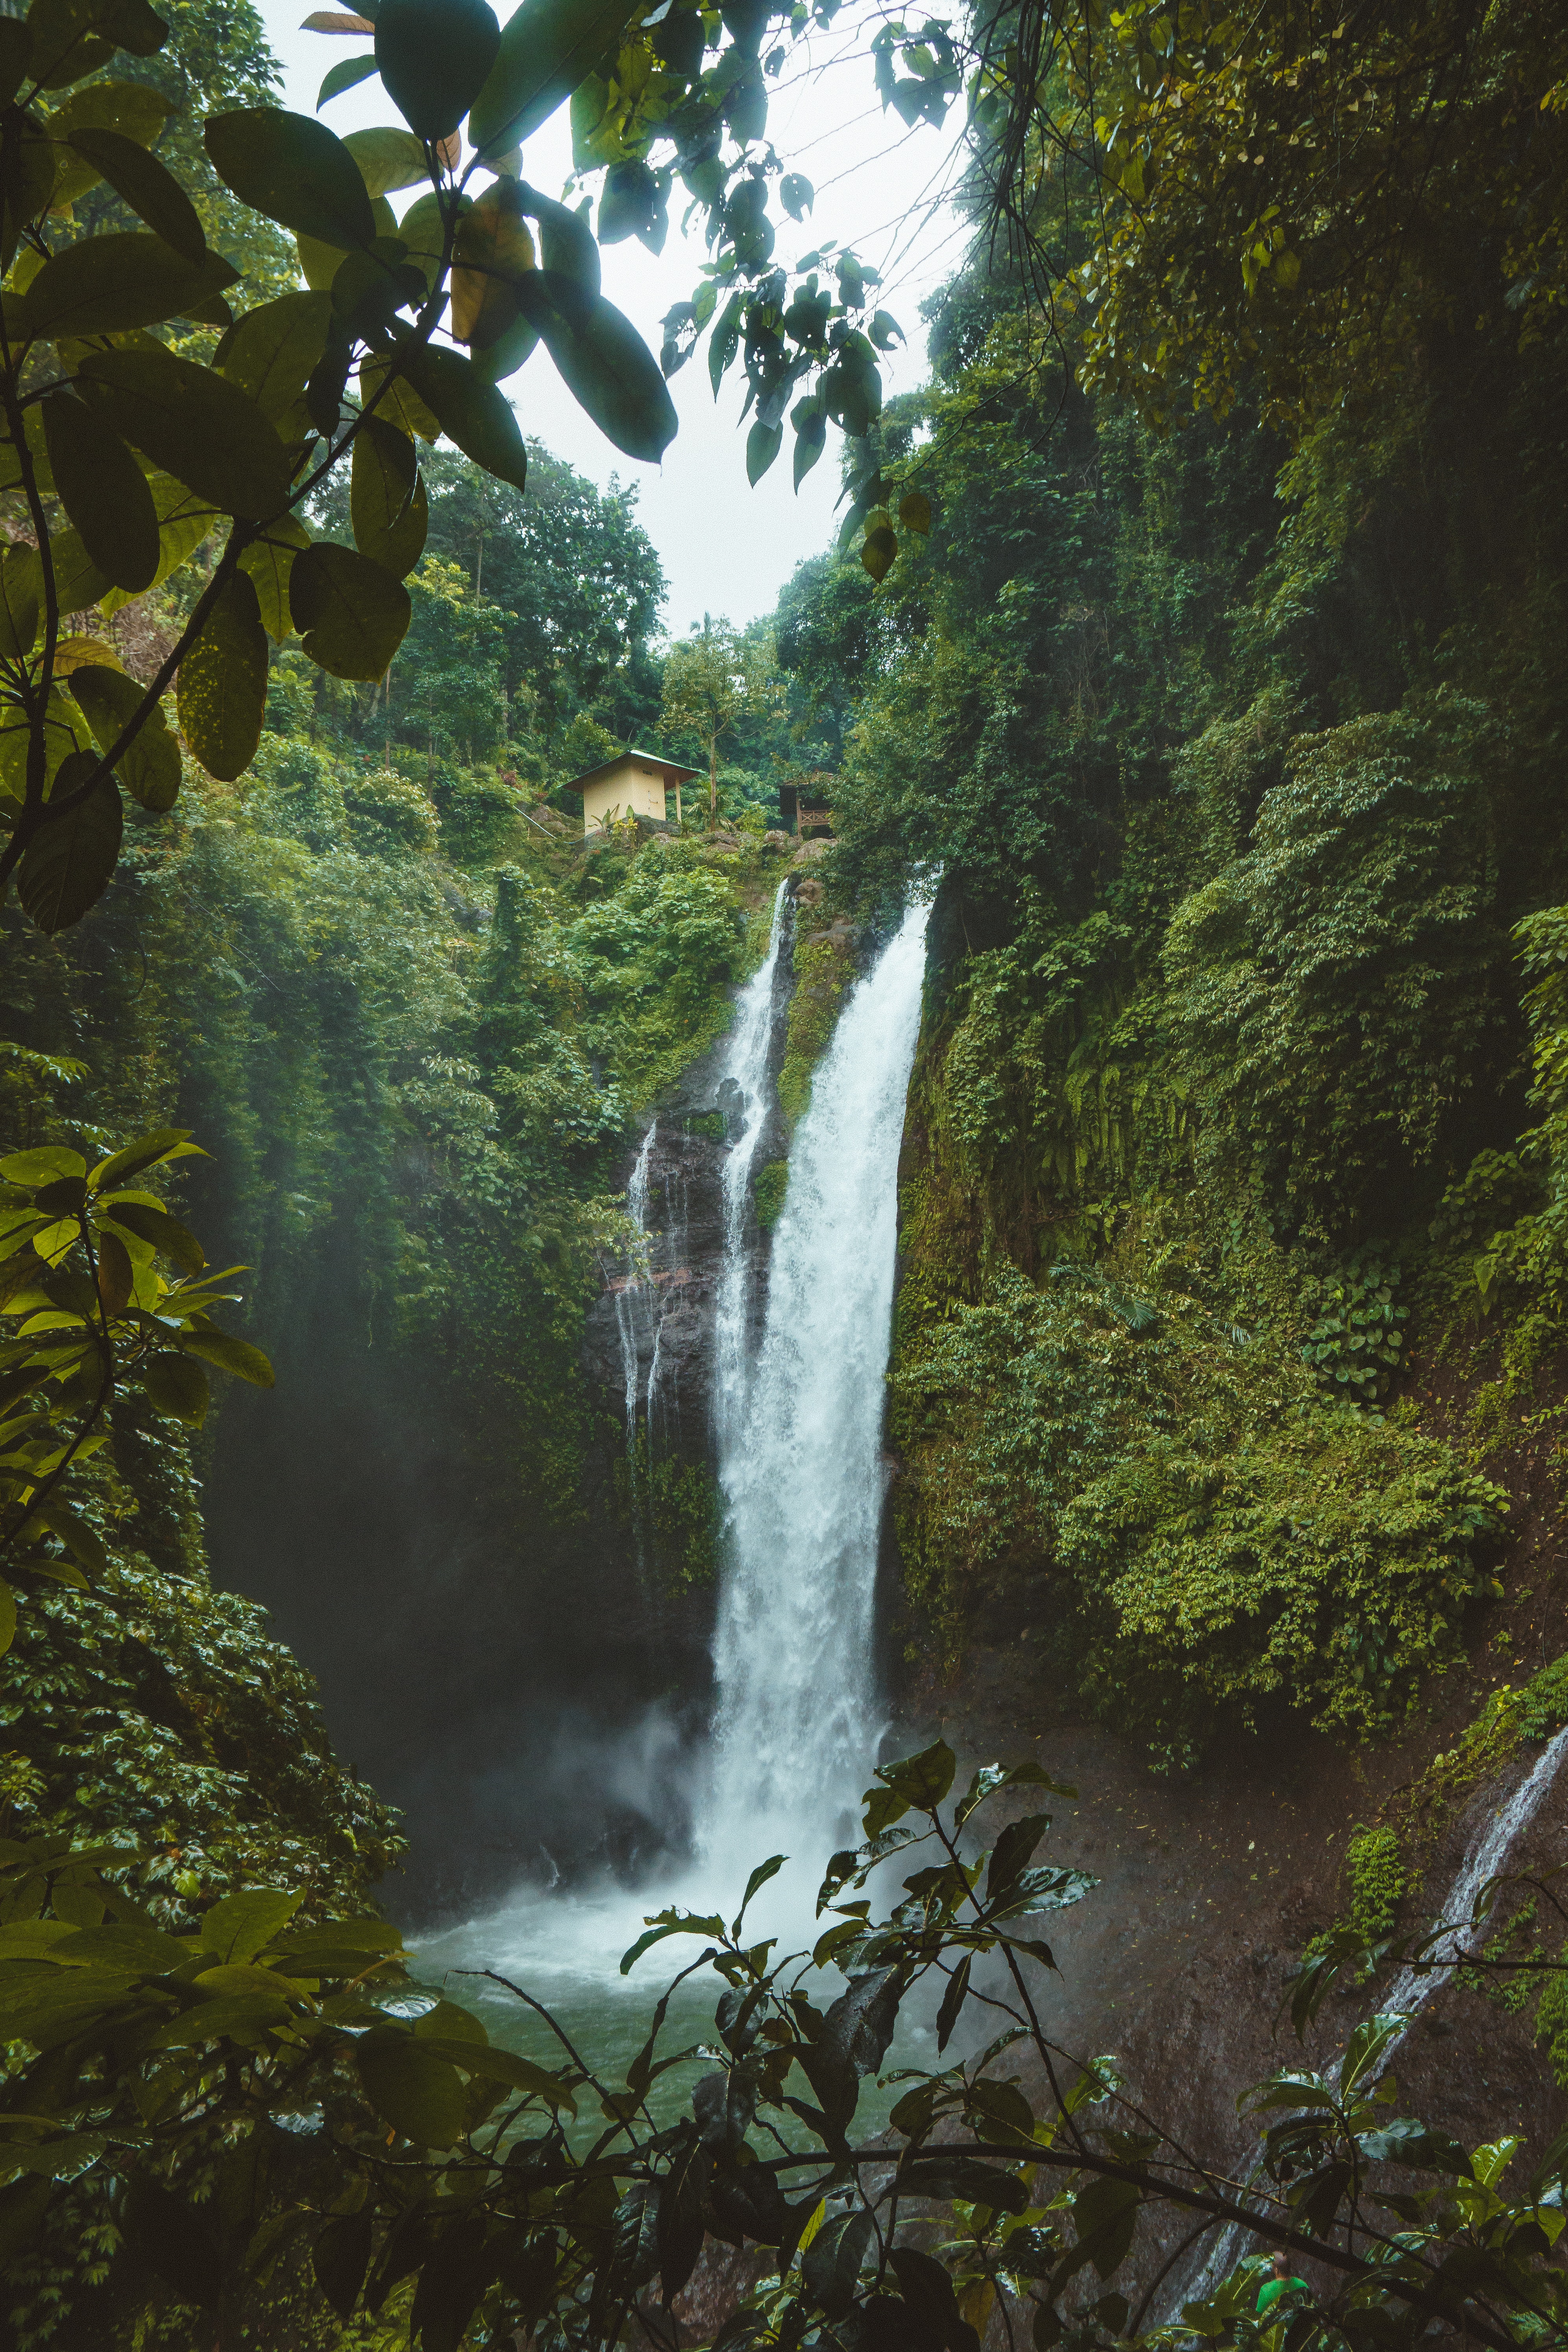 Landscape Photography of Waterfalls Surrounded by Green Leafed Plants, Adventure, Waterfall, Water, Tropical, HQ Photo